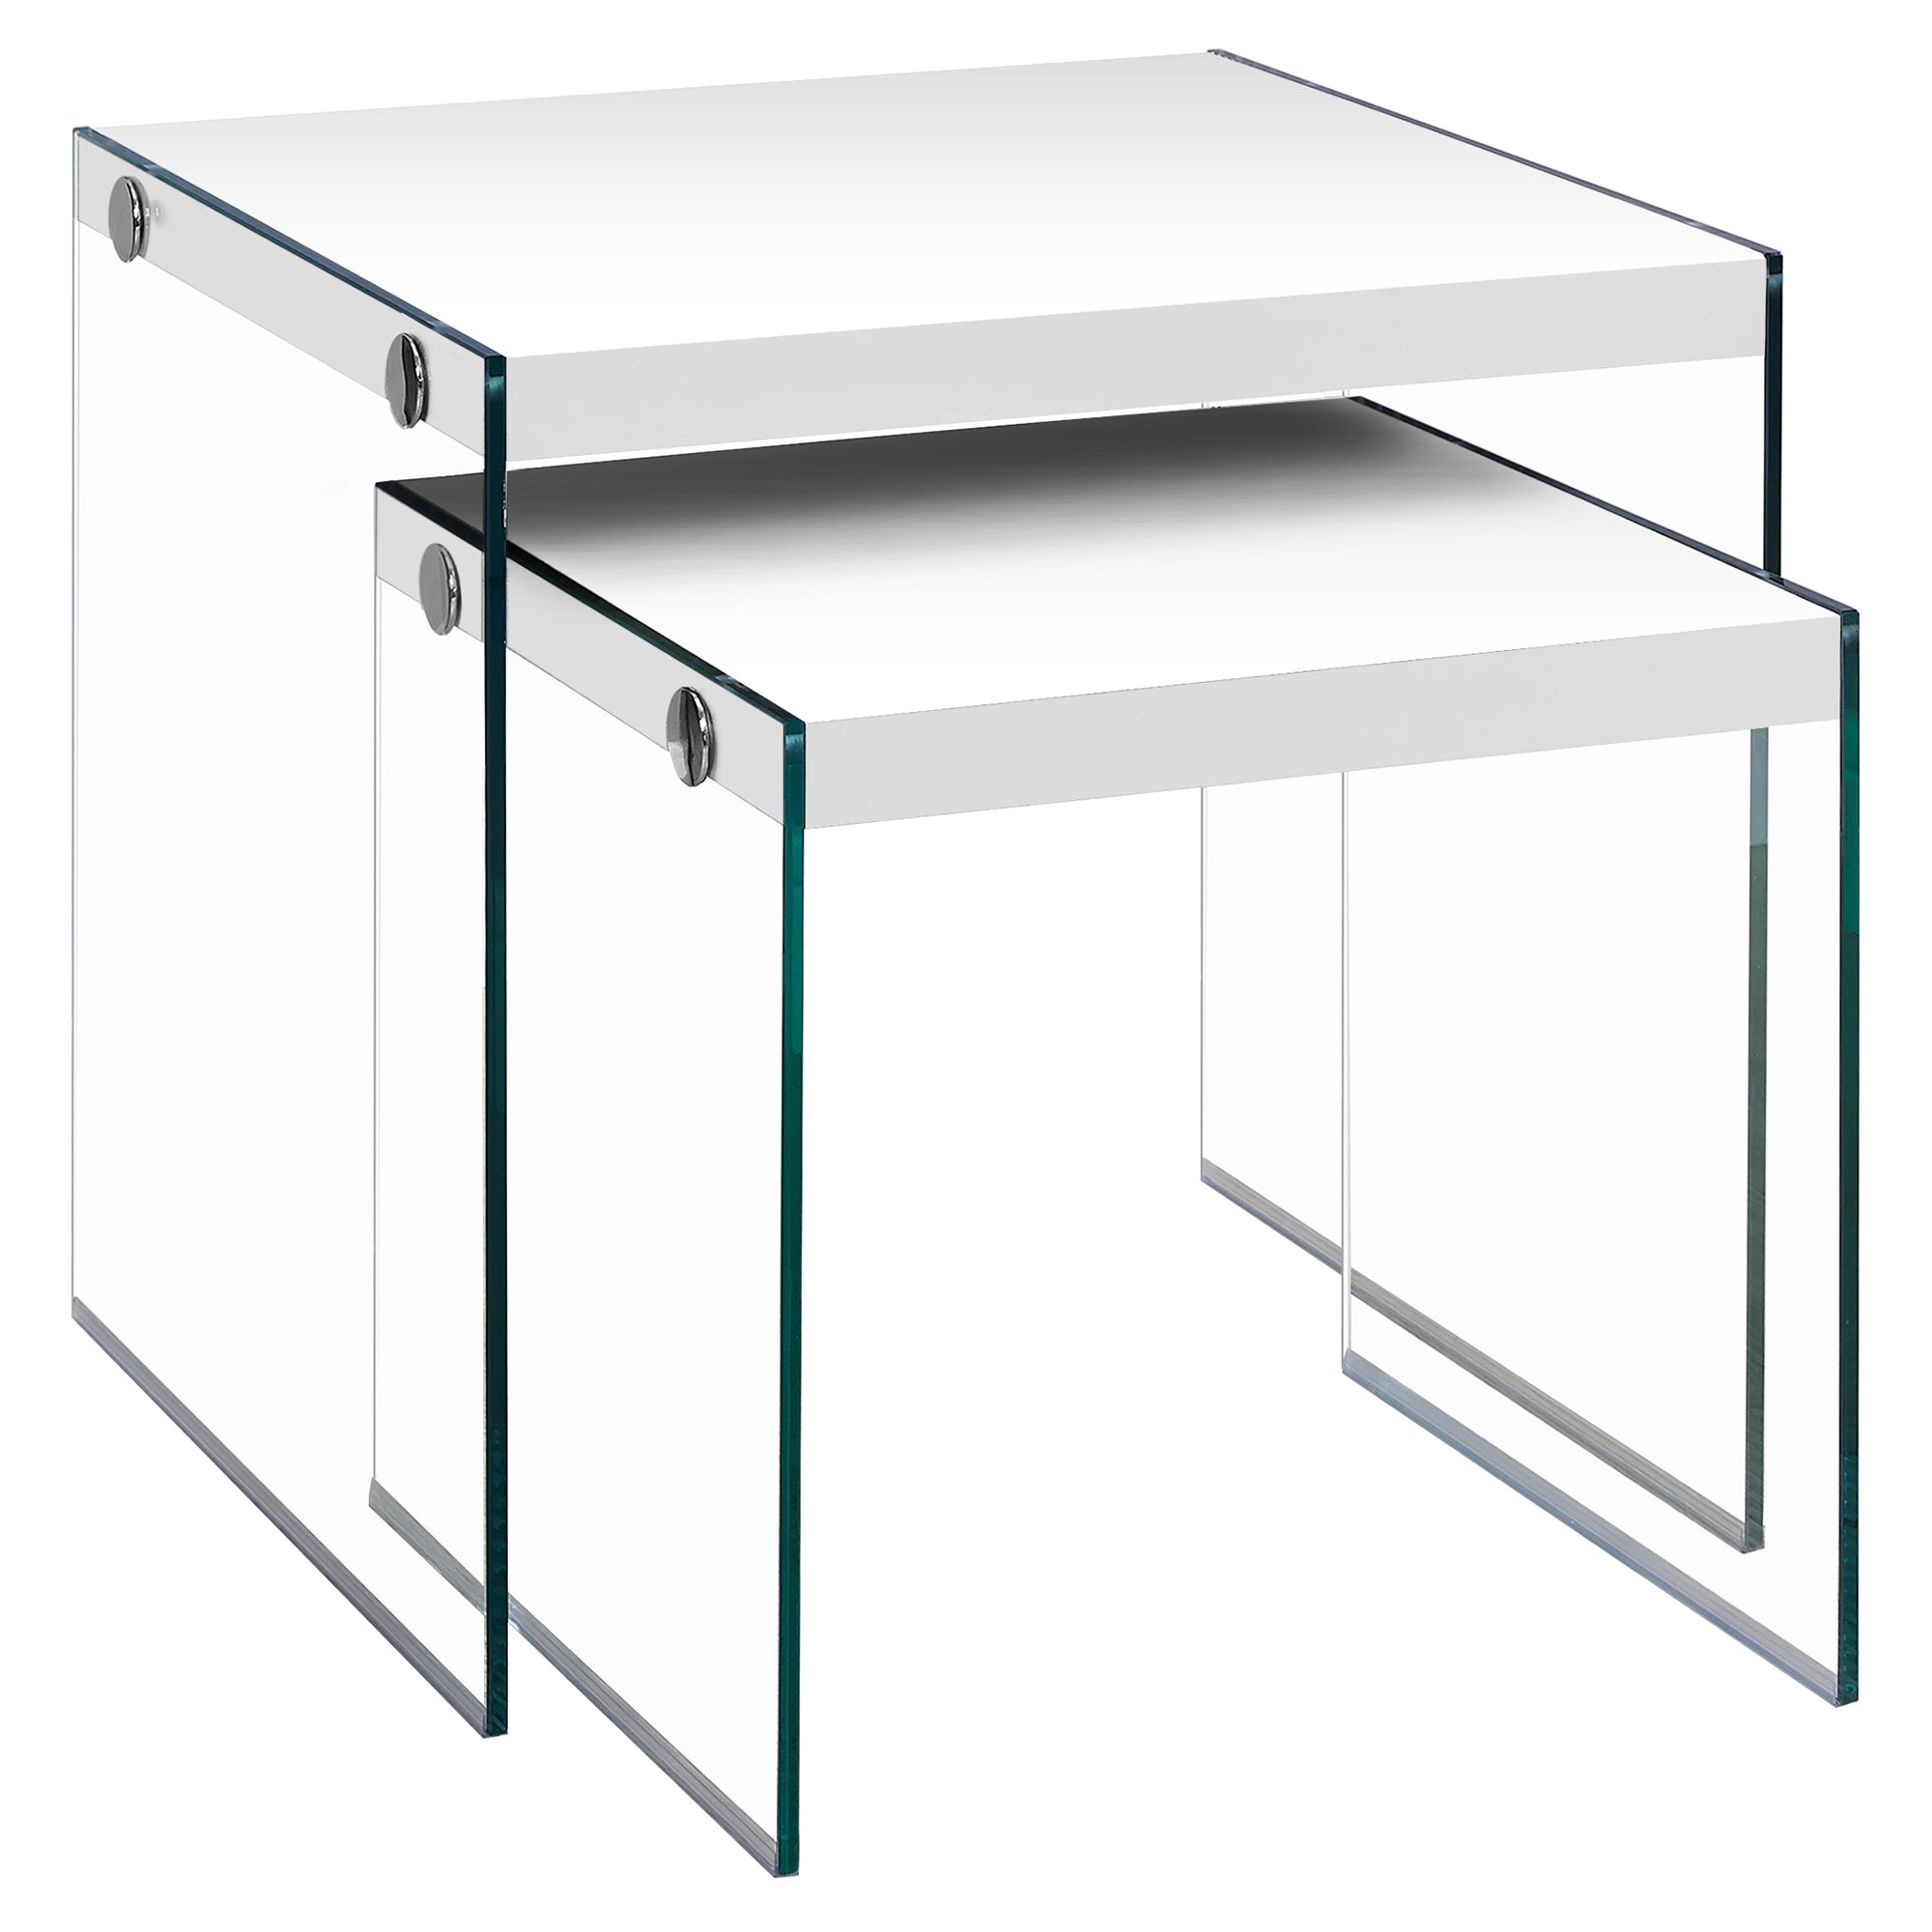 MN-143287    Nesting Table, Set Of 2, Side, End, Tempered Glass, Accent, Living Room, Bedroom, Tempered Glass, Laminate, Glossy White, Clear, Contemporary, Modern